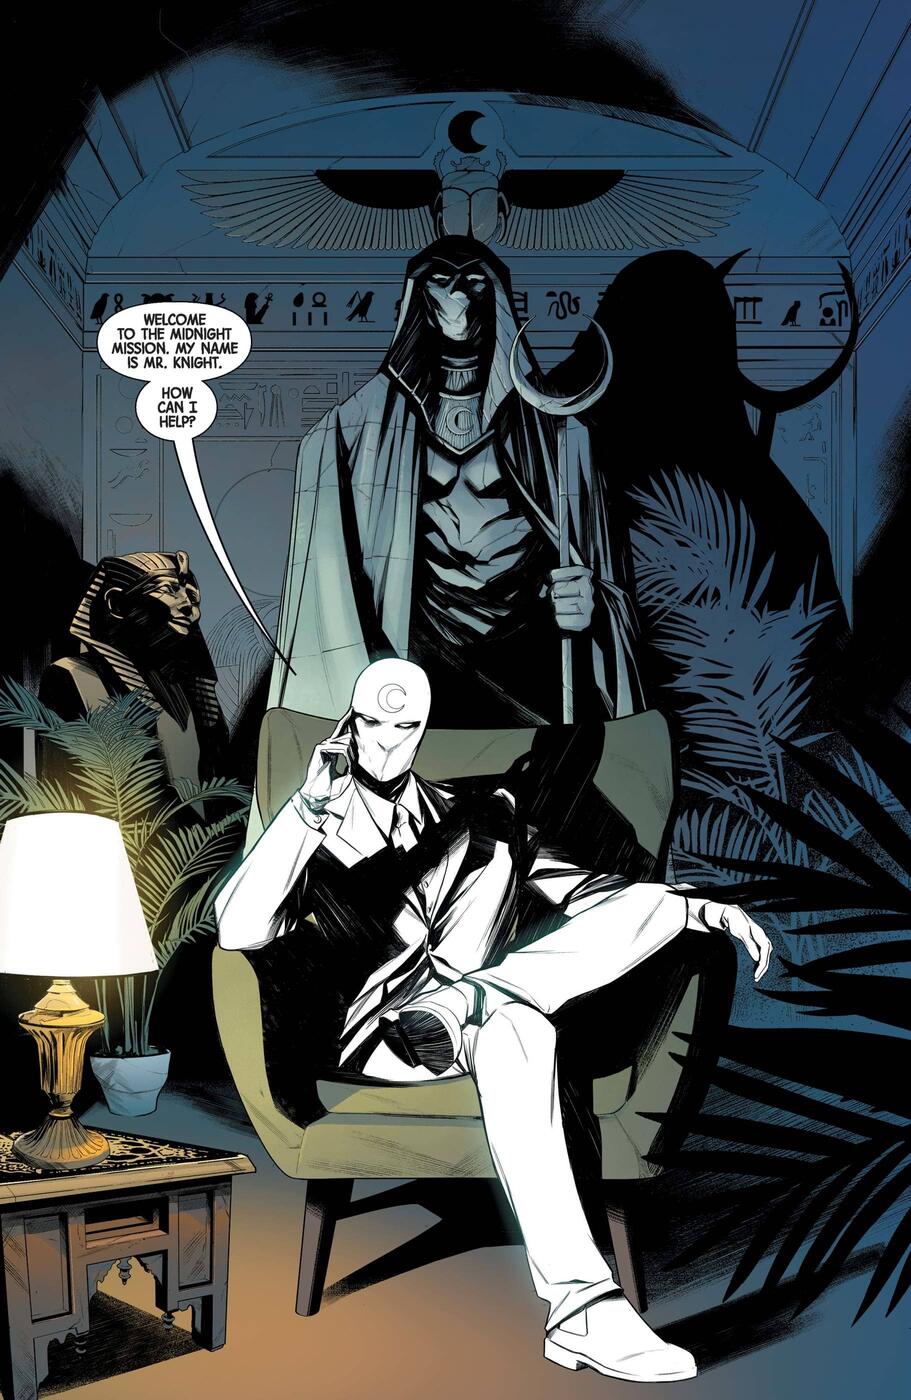 Moon Knight on a new mission